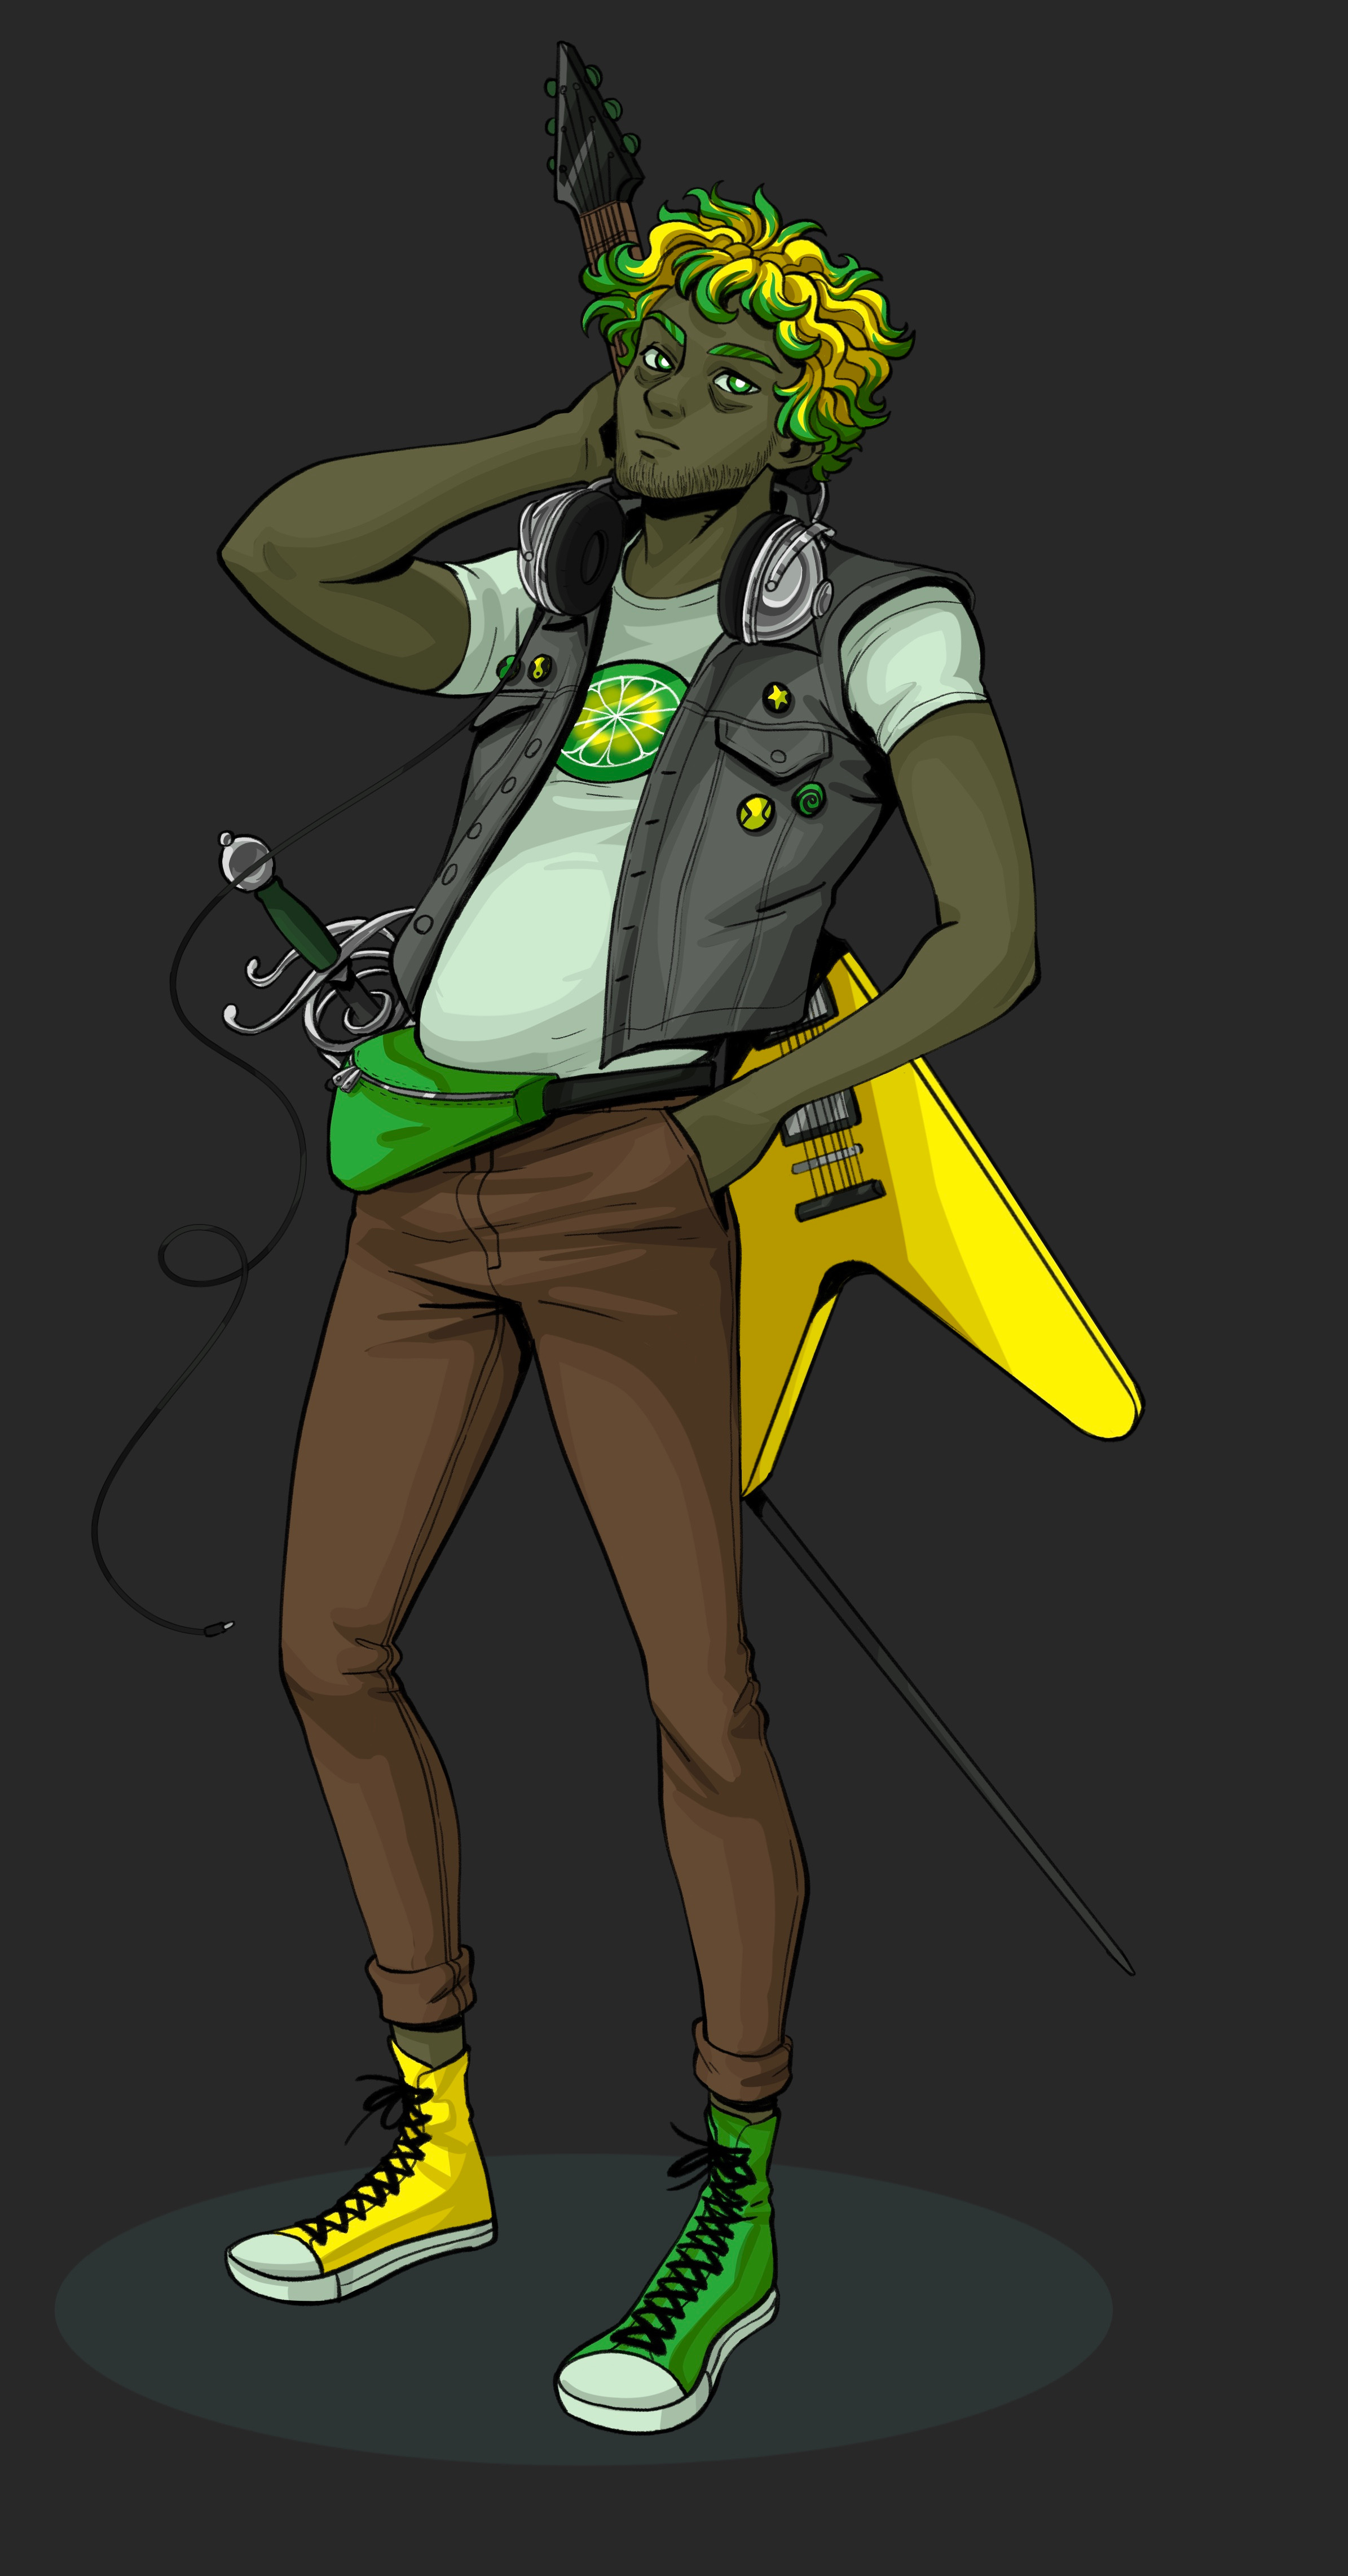 The year is 2020, someone pays me to draw the personification of Limewire, all is well in the world (not really)
This character was surprisingly fun and it was for a dnd campaign!